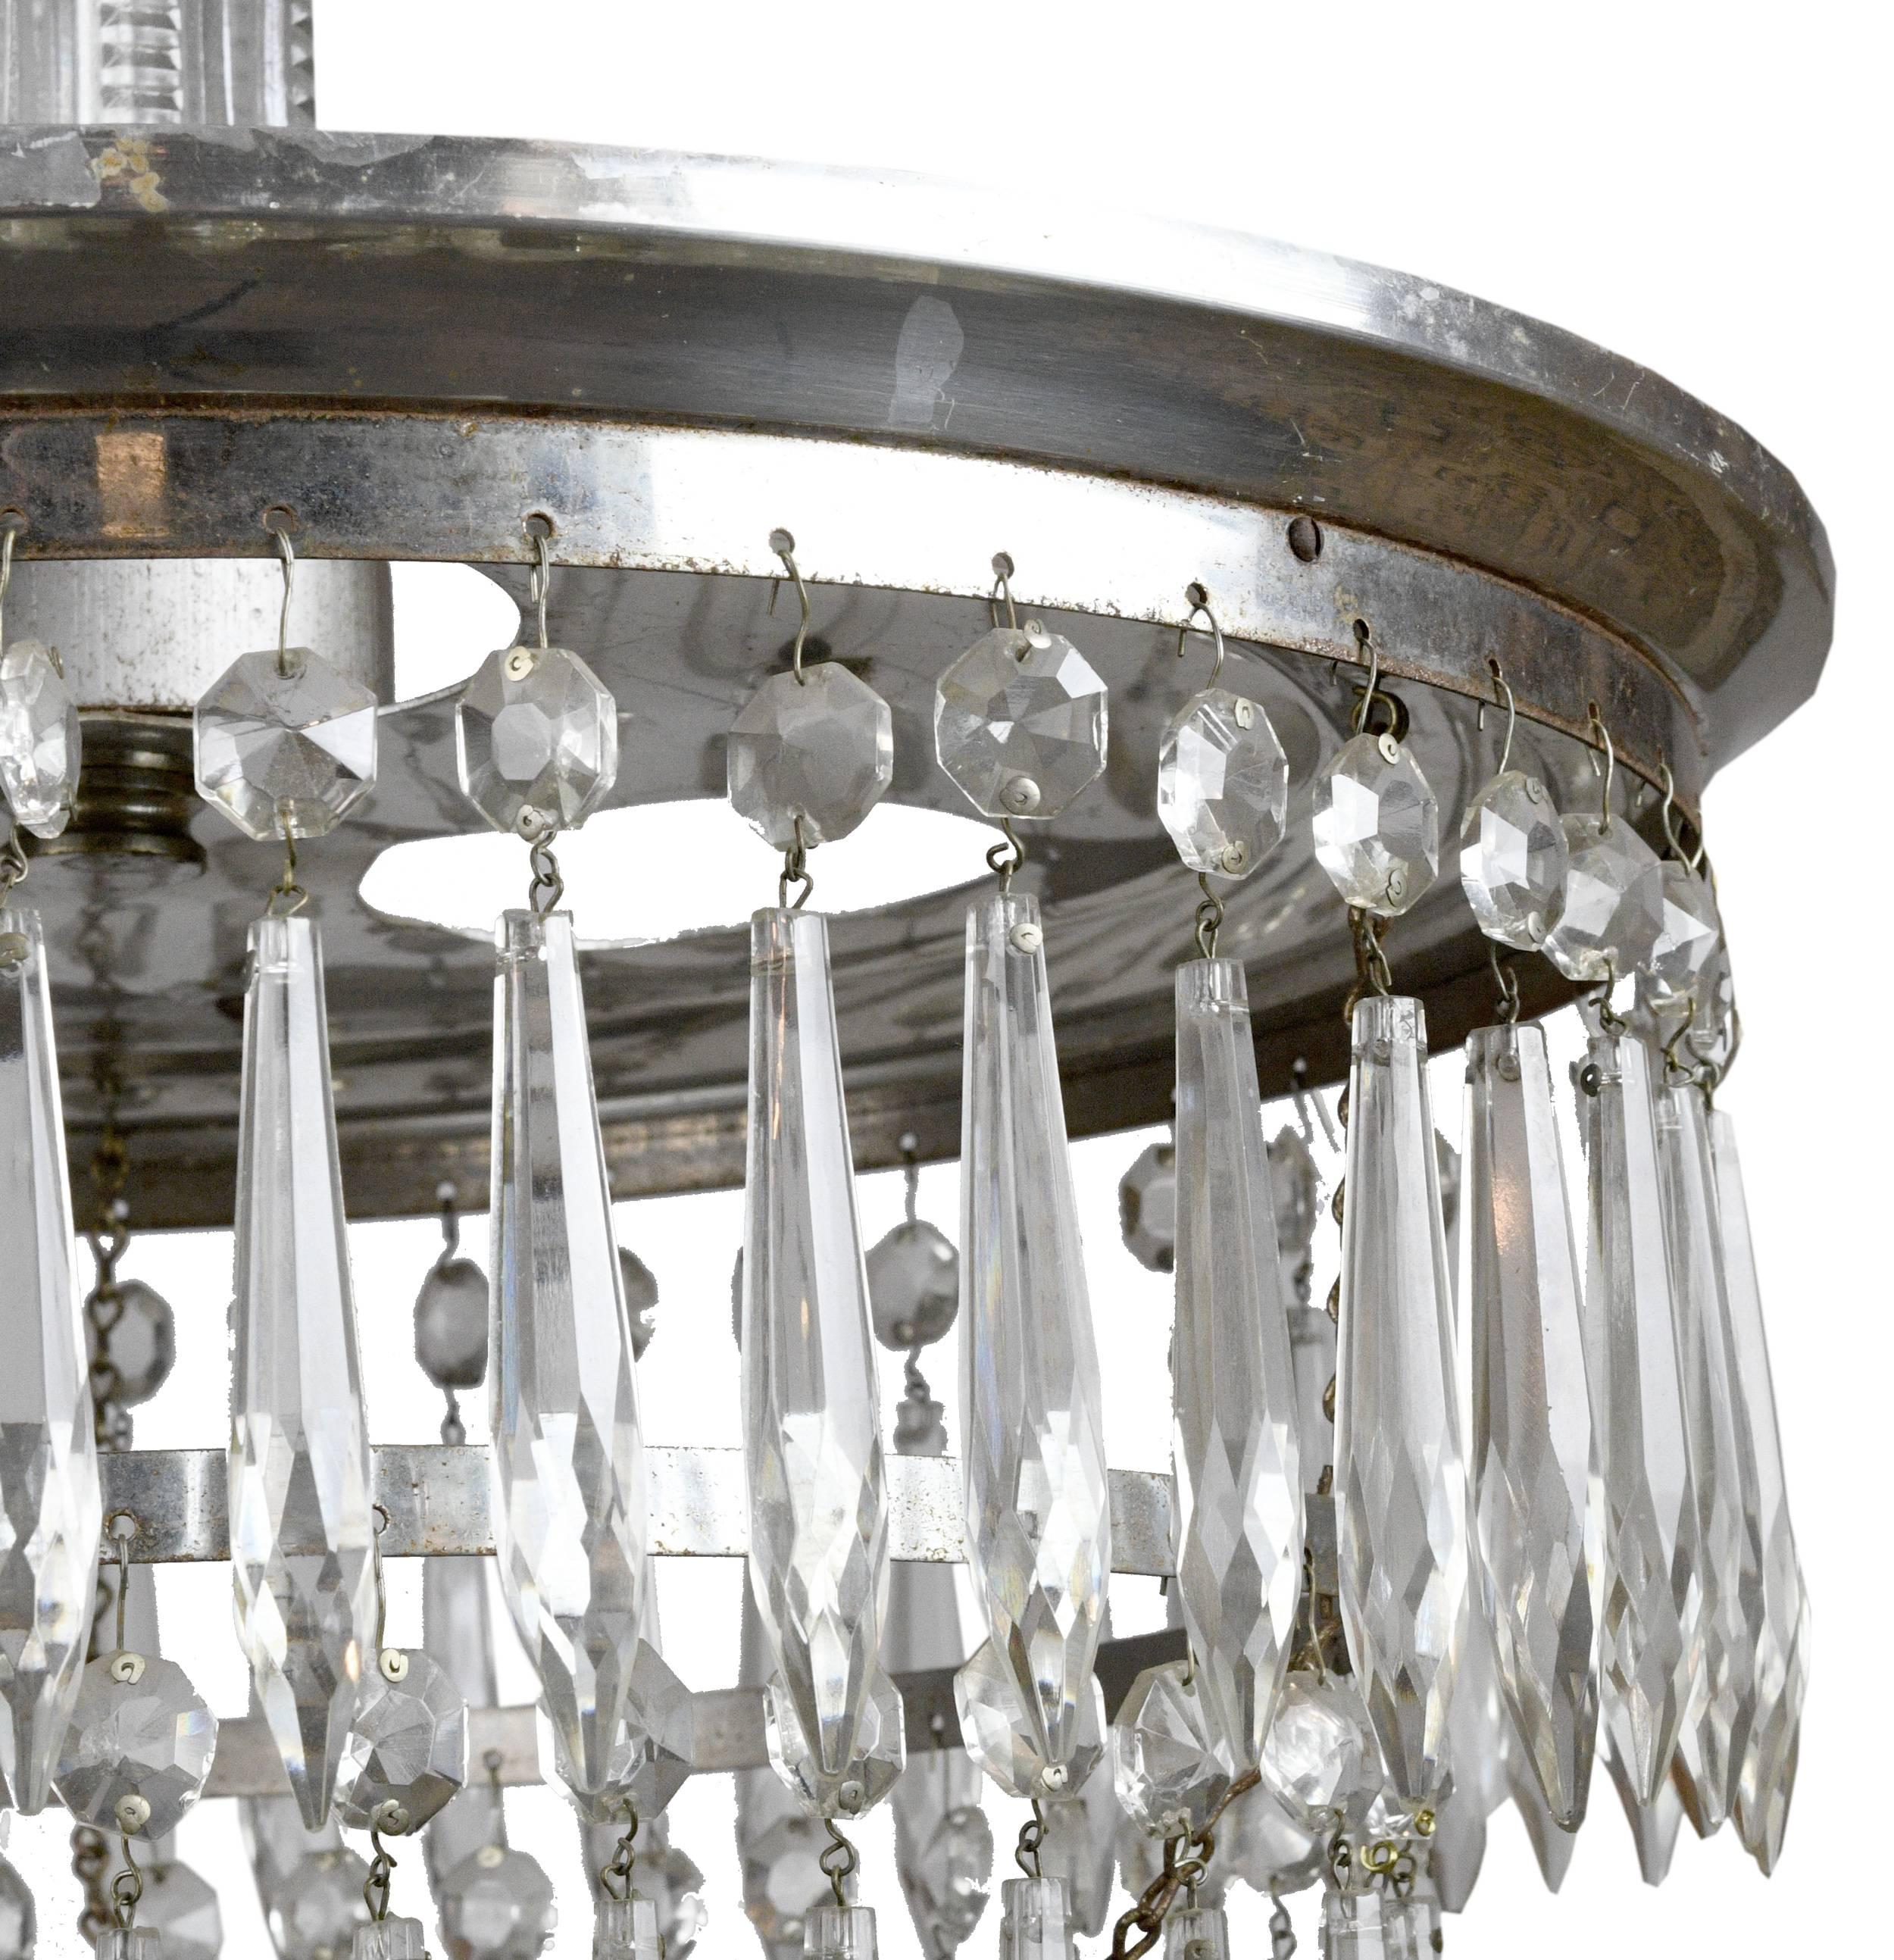 Three-light silver plated wedding cake chandelier complete with four tiers and a beautiful crystal ball finial. Elegant and refined, this fixture will add a timeless touch to any space, 

circa 1925
Condition: Excellent
Finish: Original
Country